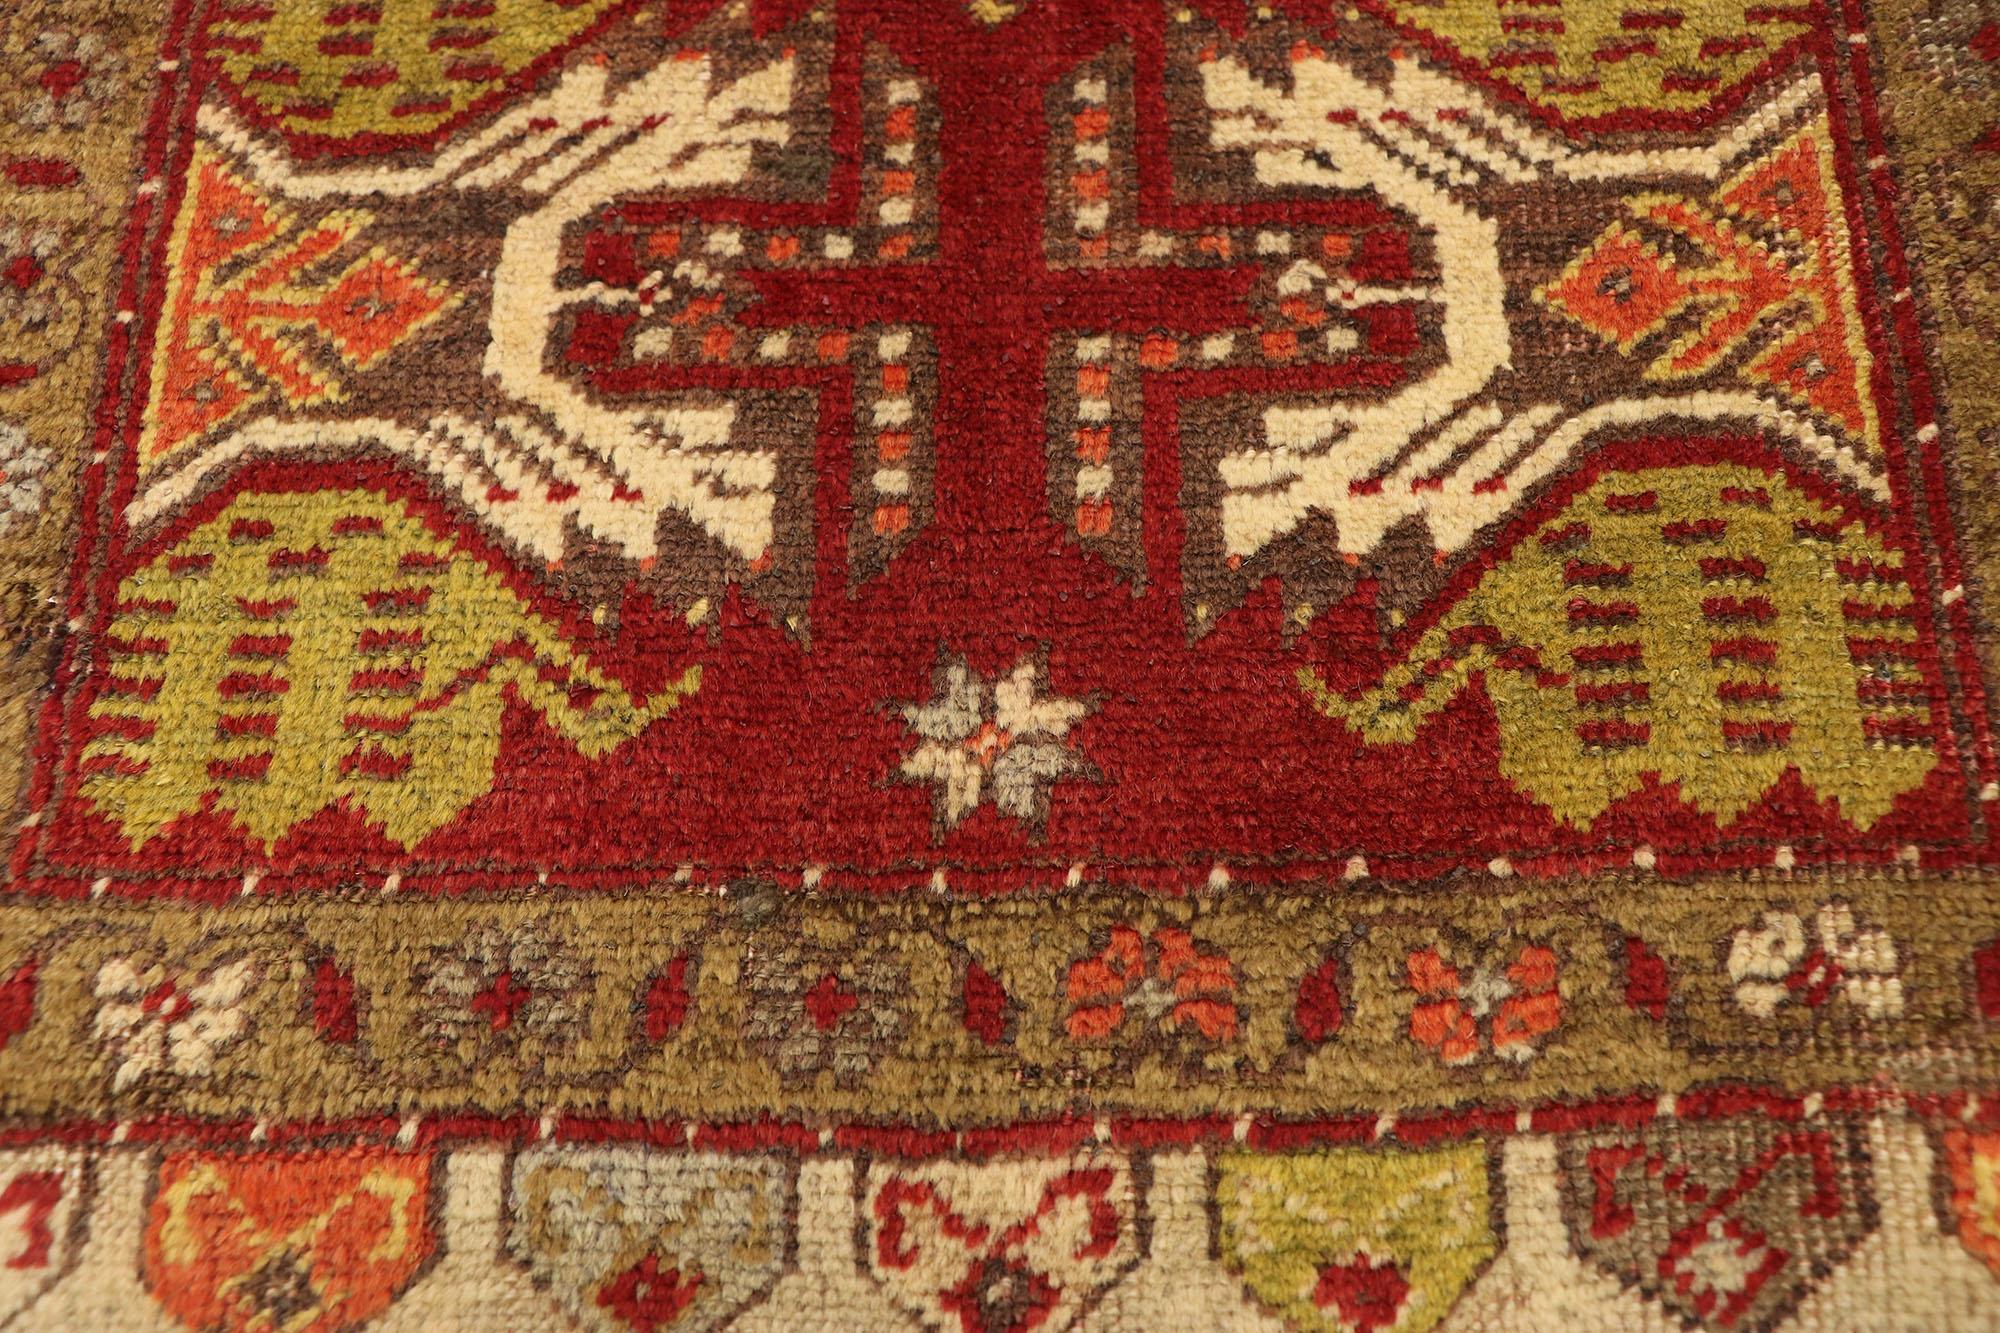  Vintage Turkish Oushak Yastik Scatter Rug, Small Accent Rug In Good Condition For Sale In Dallas, TX